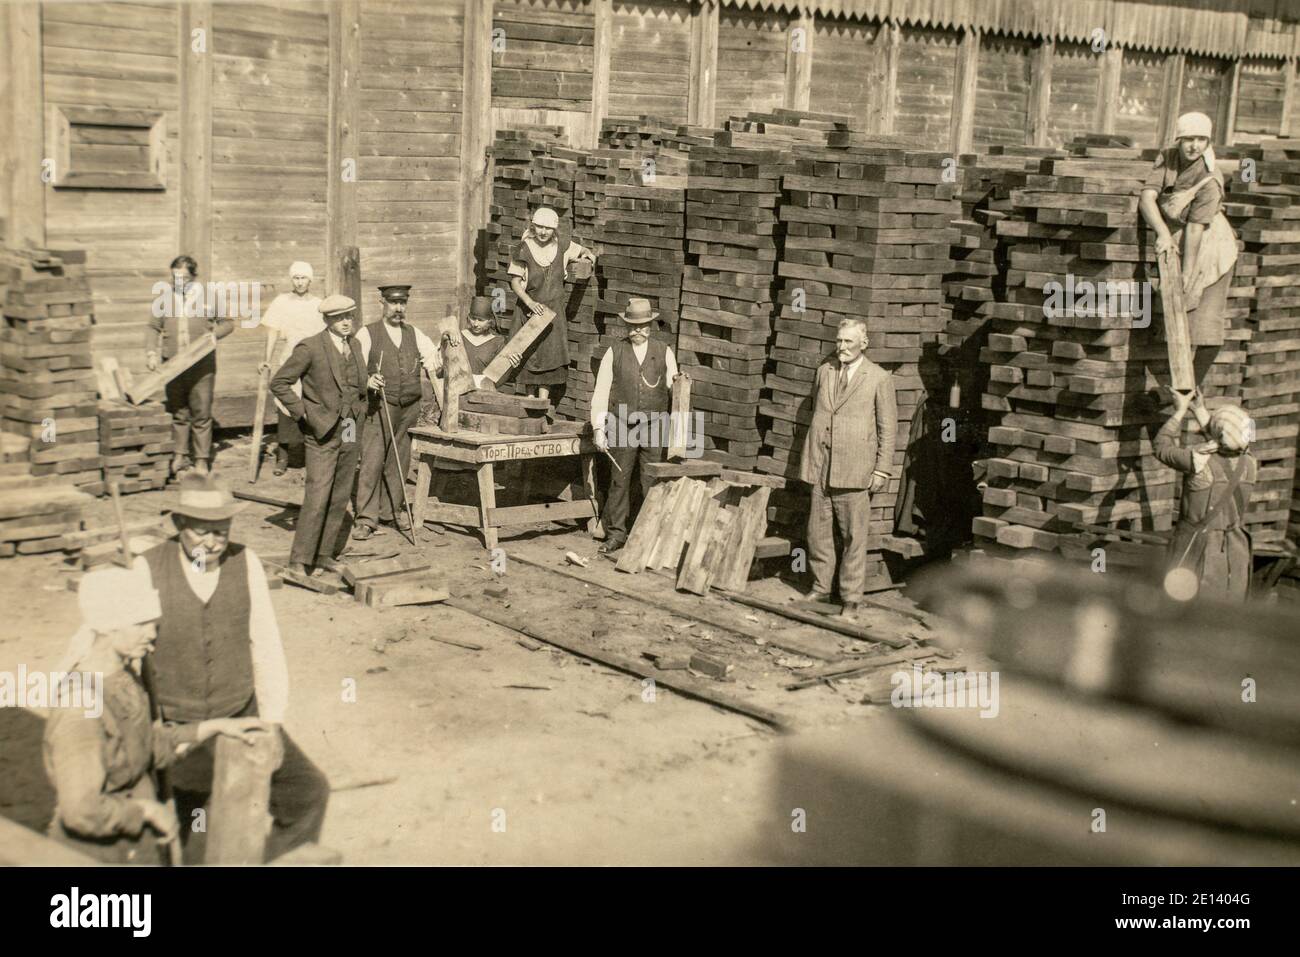 RUSSIA - CIRCA 1920s: Vintage archive photo of business owners managers and workers in rail sleepers factory. Sawmill Stock Photo